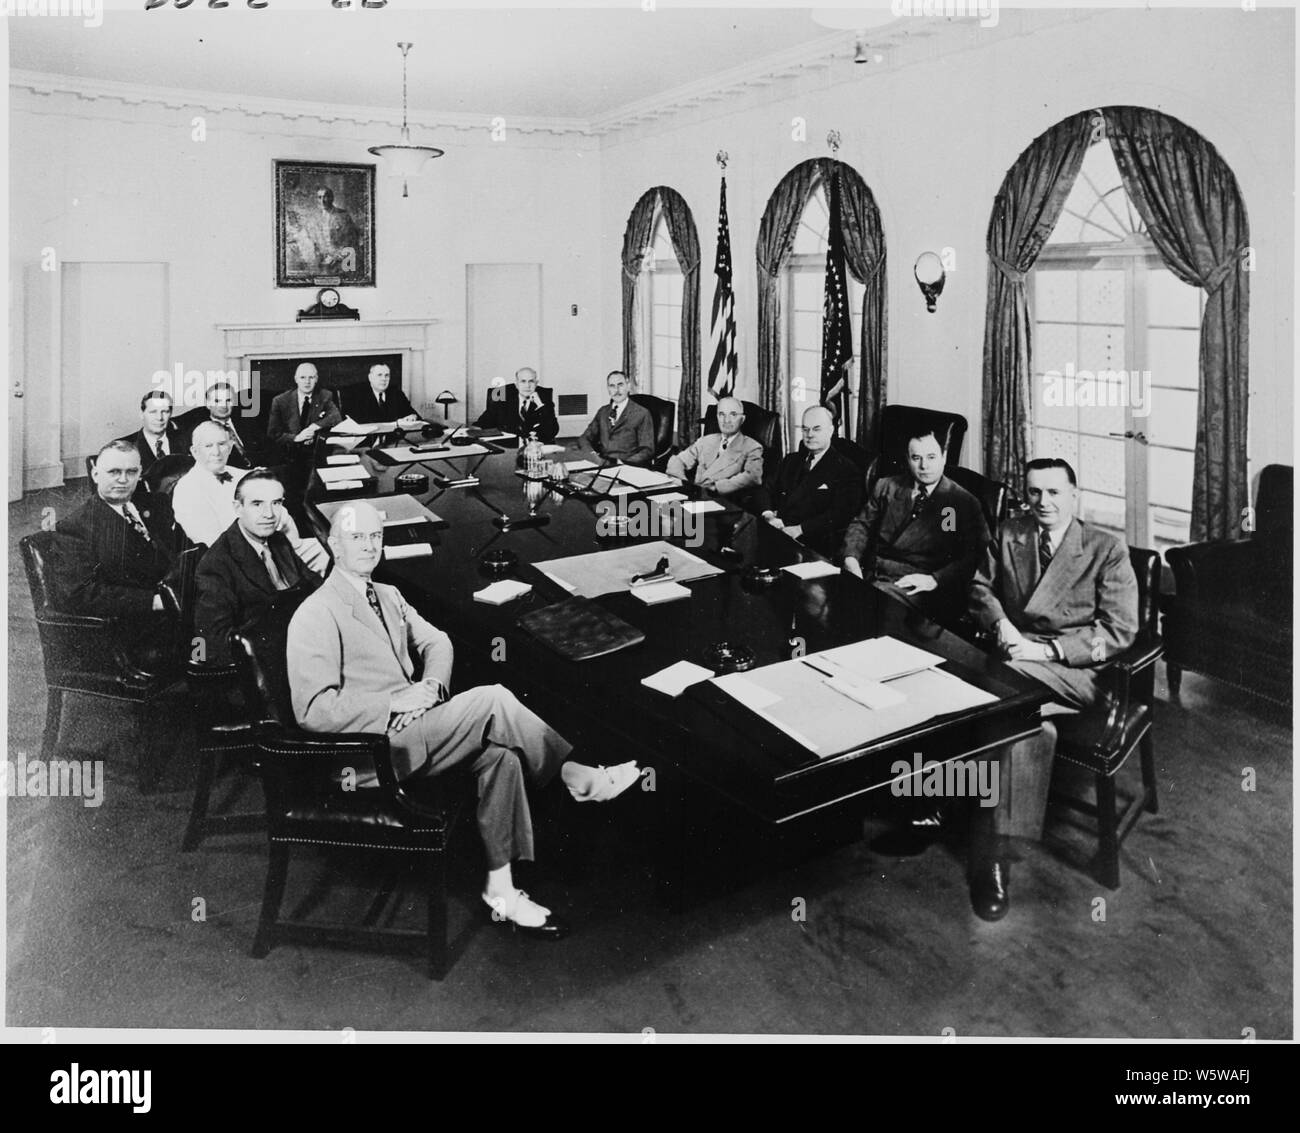 Photograph of President Truman with members of his Cabinet and other officials, in the Cabinet Room of the White House: (from left to right around table) Secretary of Commerce Charles Sawyer; Special Assistant to the President Averell Harriman; Assistant to the President John Steelman; Vice President Alben Barkley; Secretary of Labor Maurice Tobin; Chairman Stuart Symington of the National Security Resources Board; Secretary of Agriculture Charles Brannan; Postmaster General Jesse Donaldson; Secretary of Defense Louis Johnson; Secretary of State Dean Acheson; the President; Secretary of the Tr Stock Photo